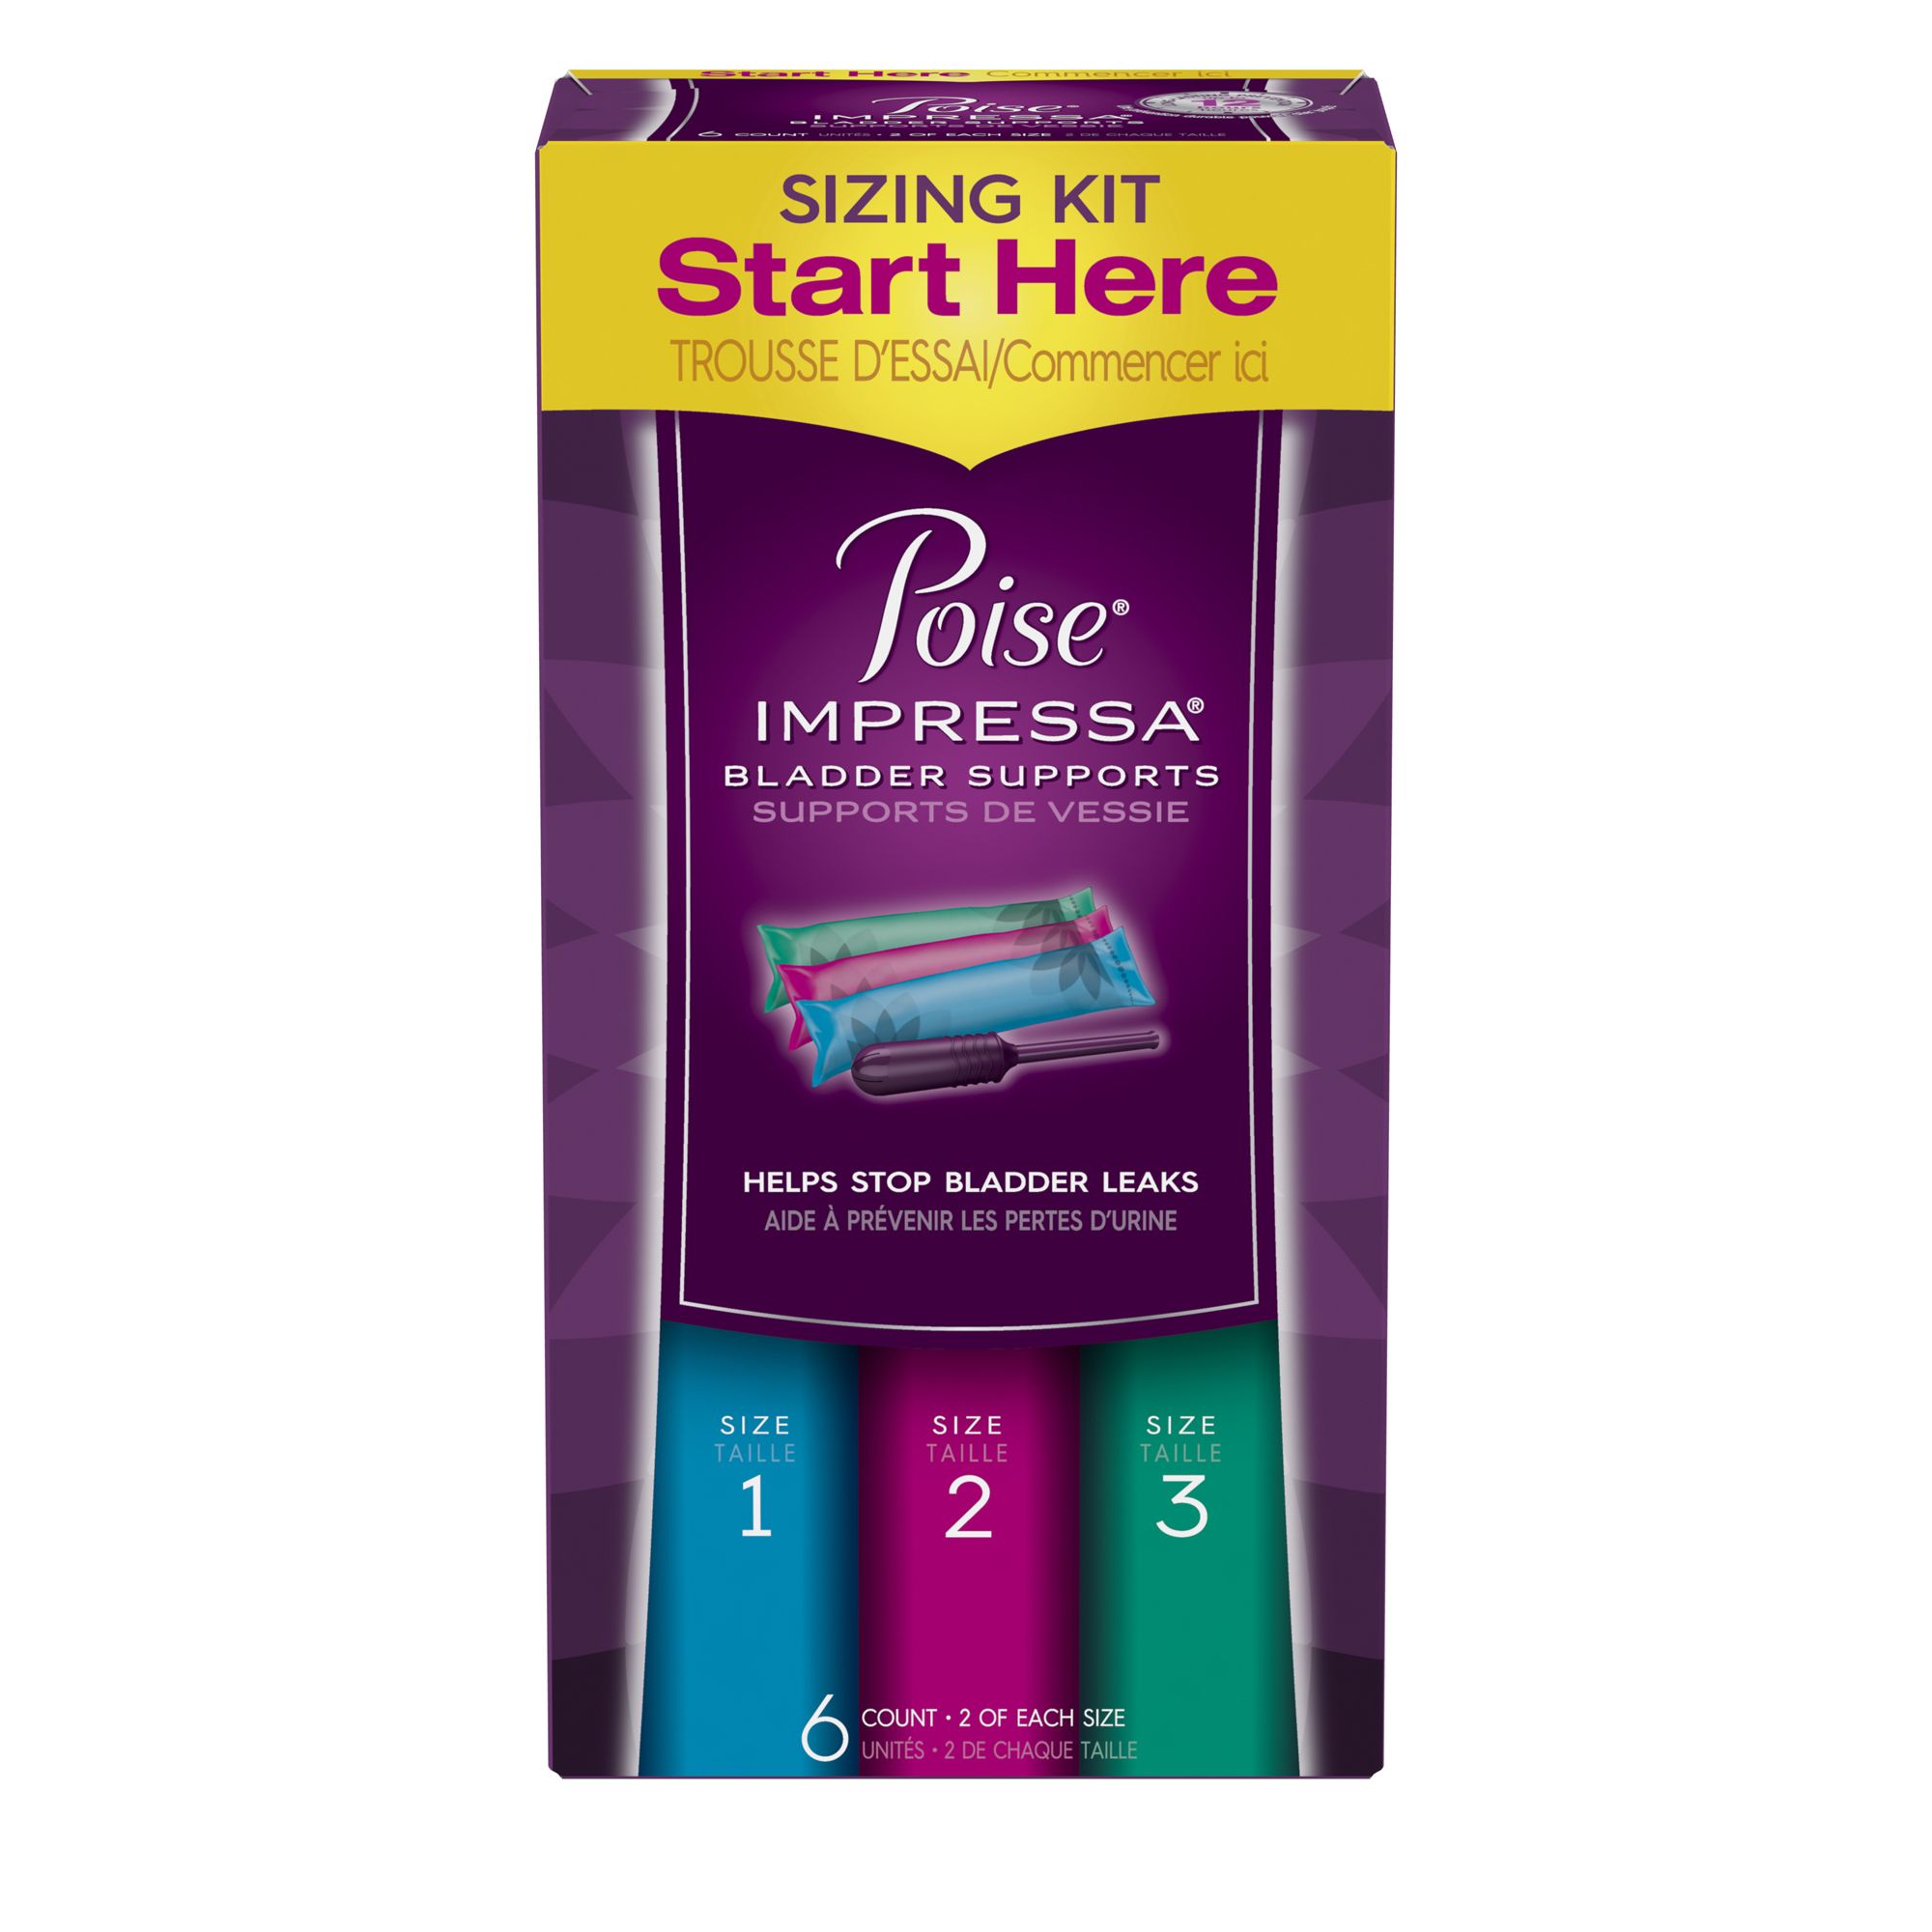 Poise Impressa Bladder Supports Size 2 - 10 ct, Pack of 2